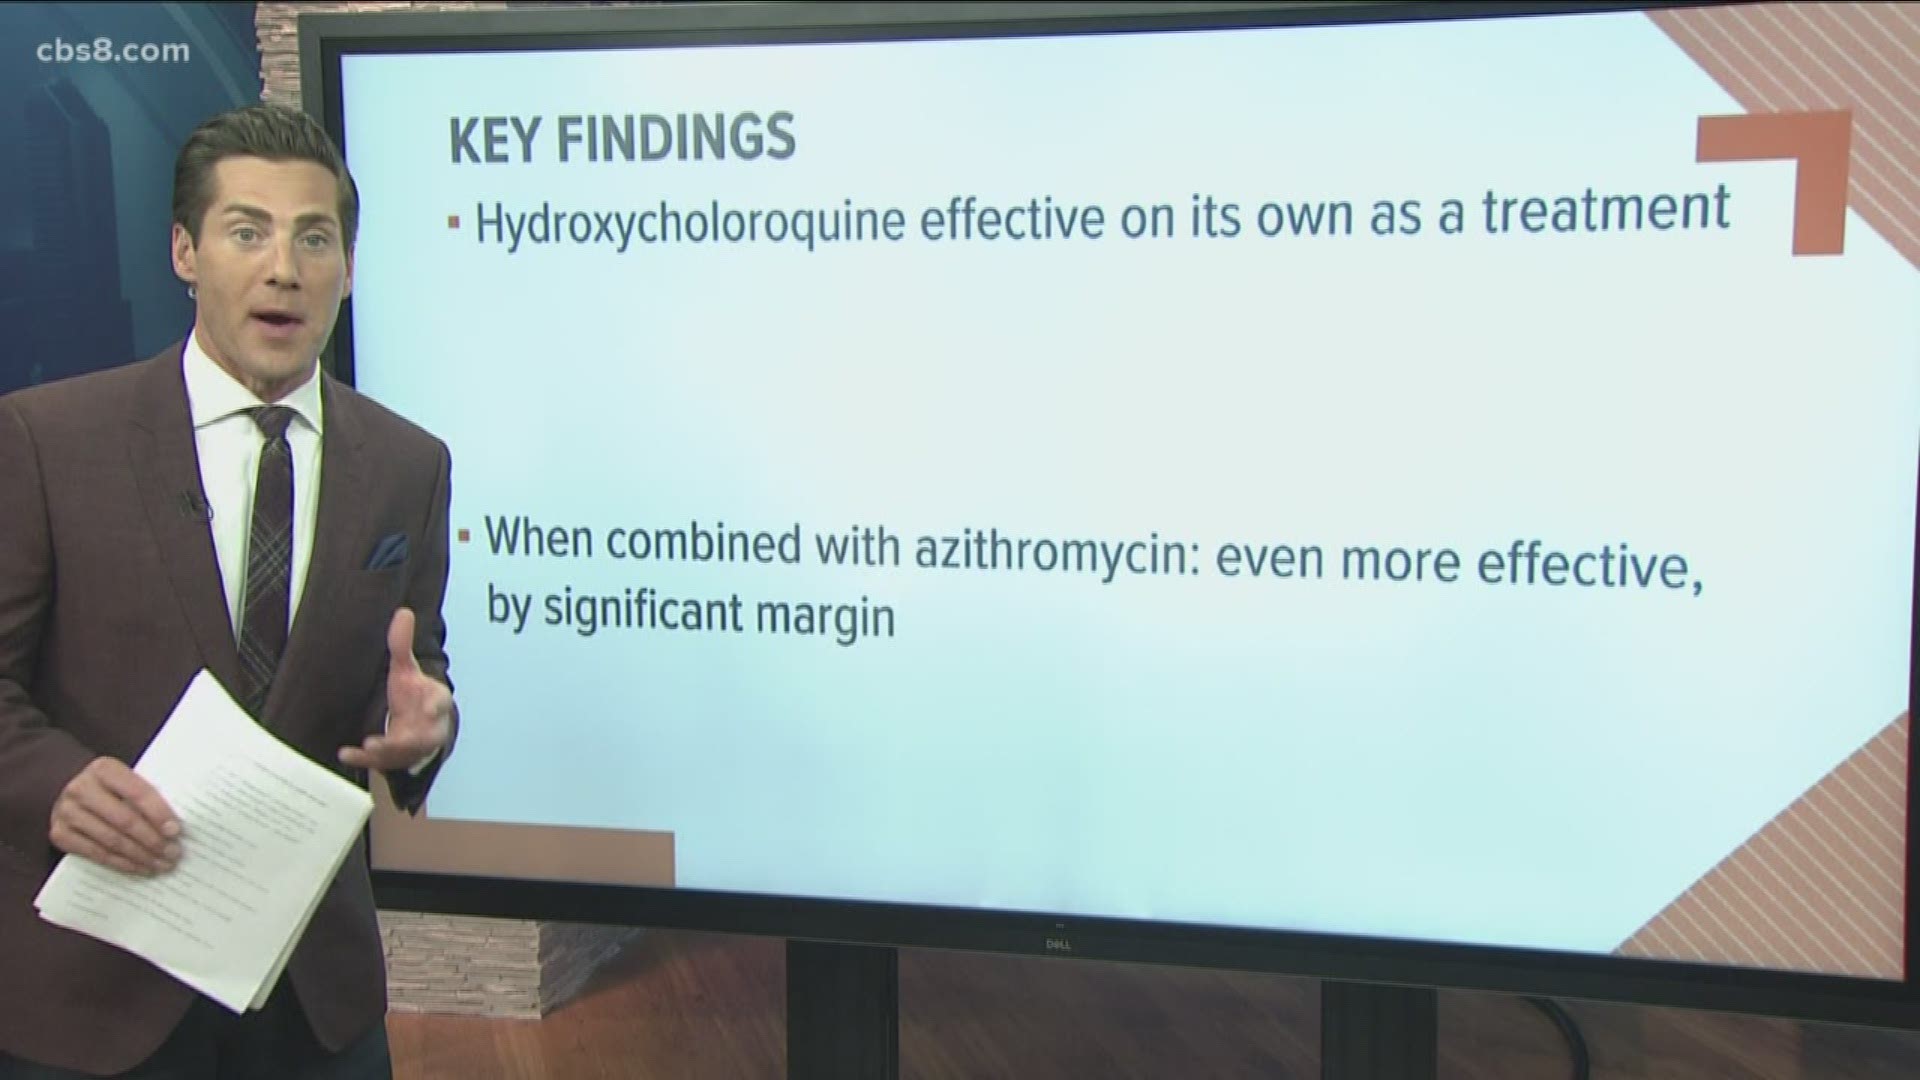 Study shows hydroxycholoroquine effective on its own as a treatment.